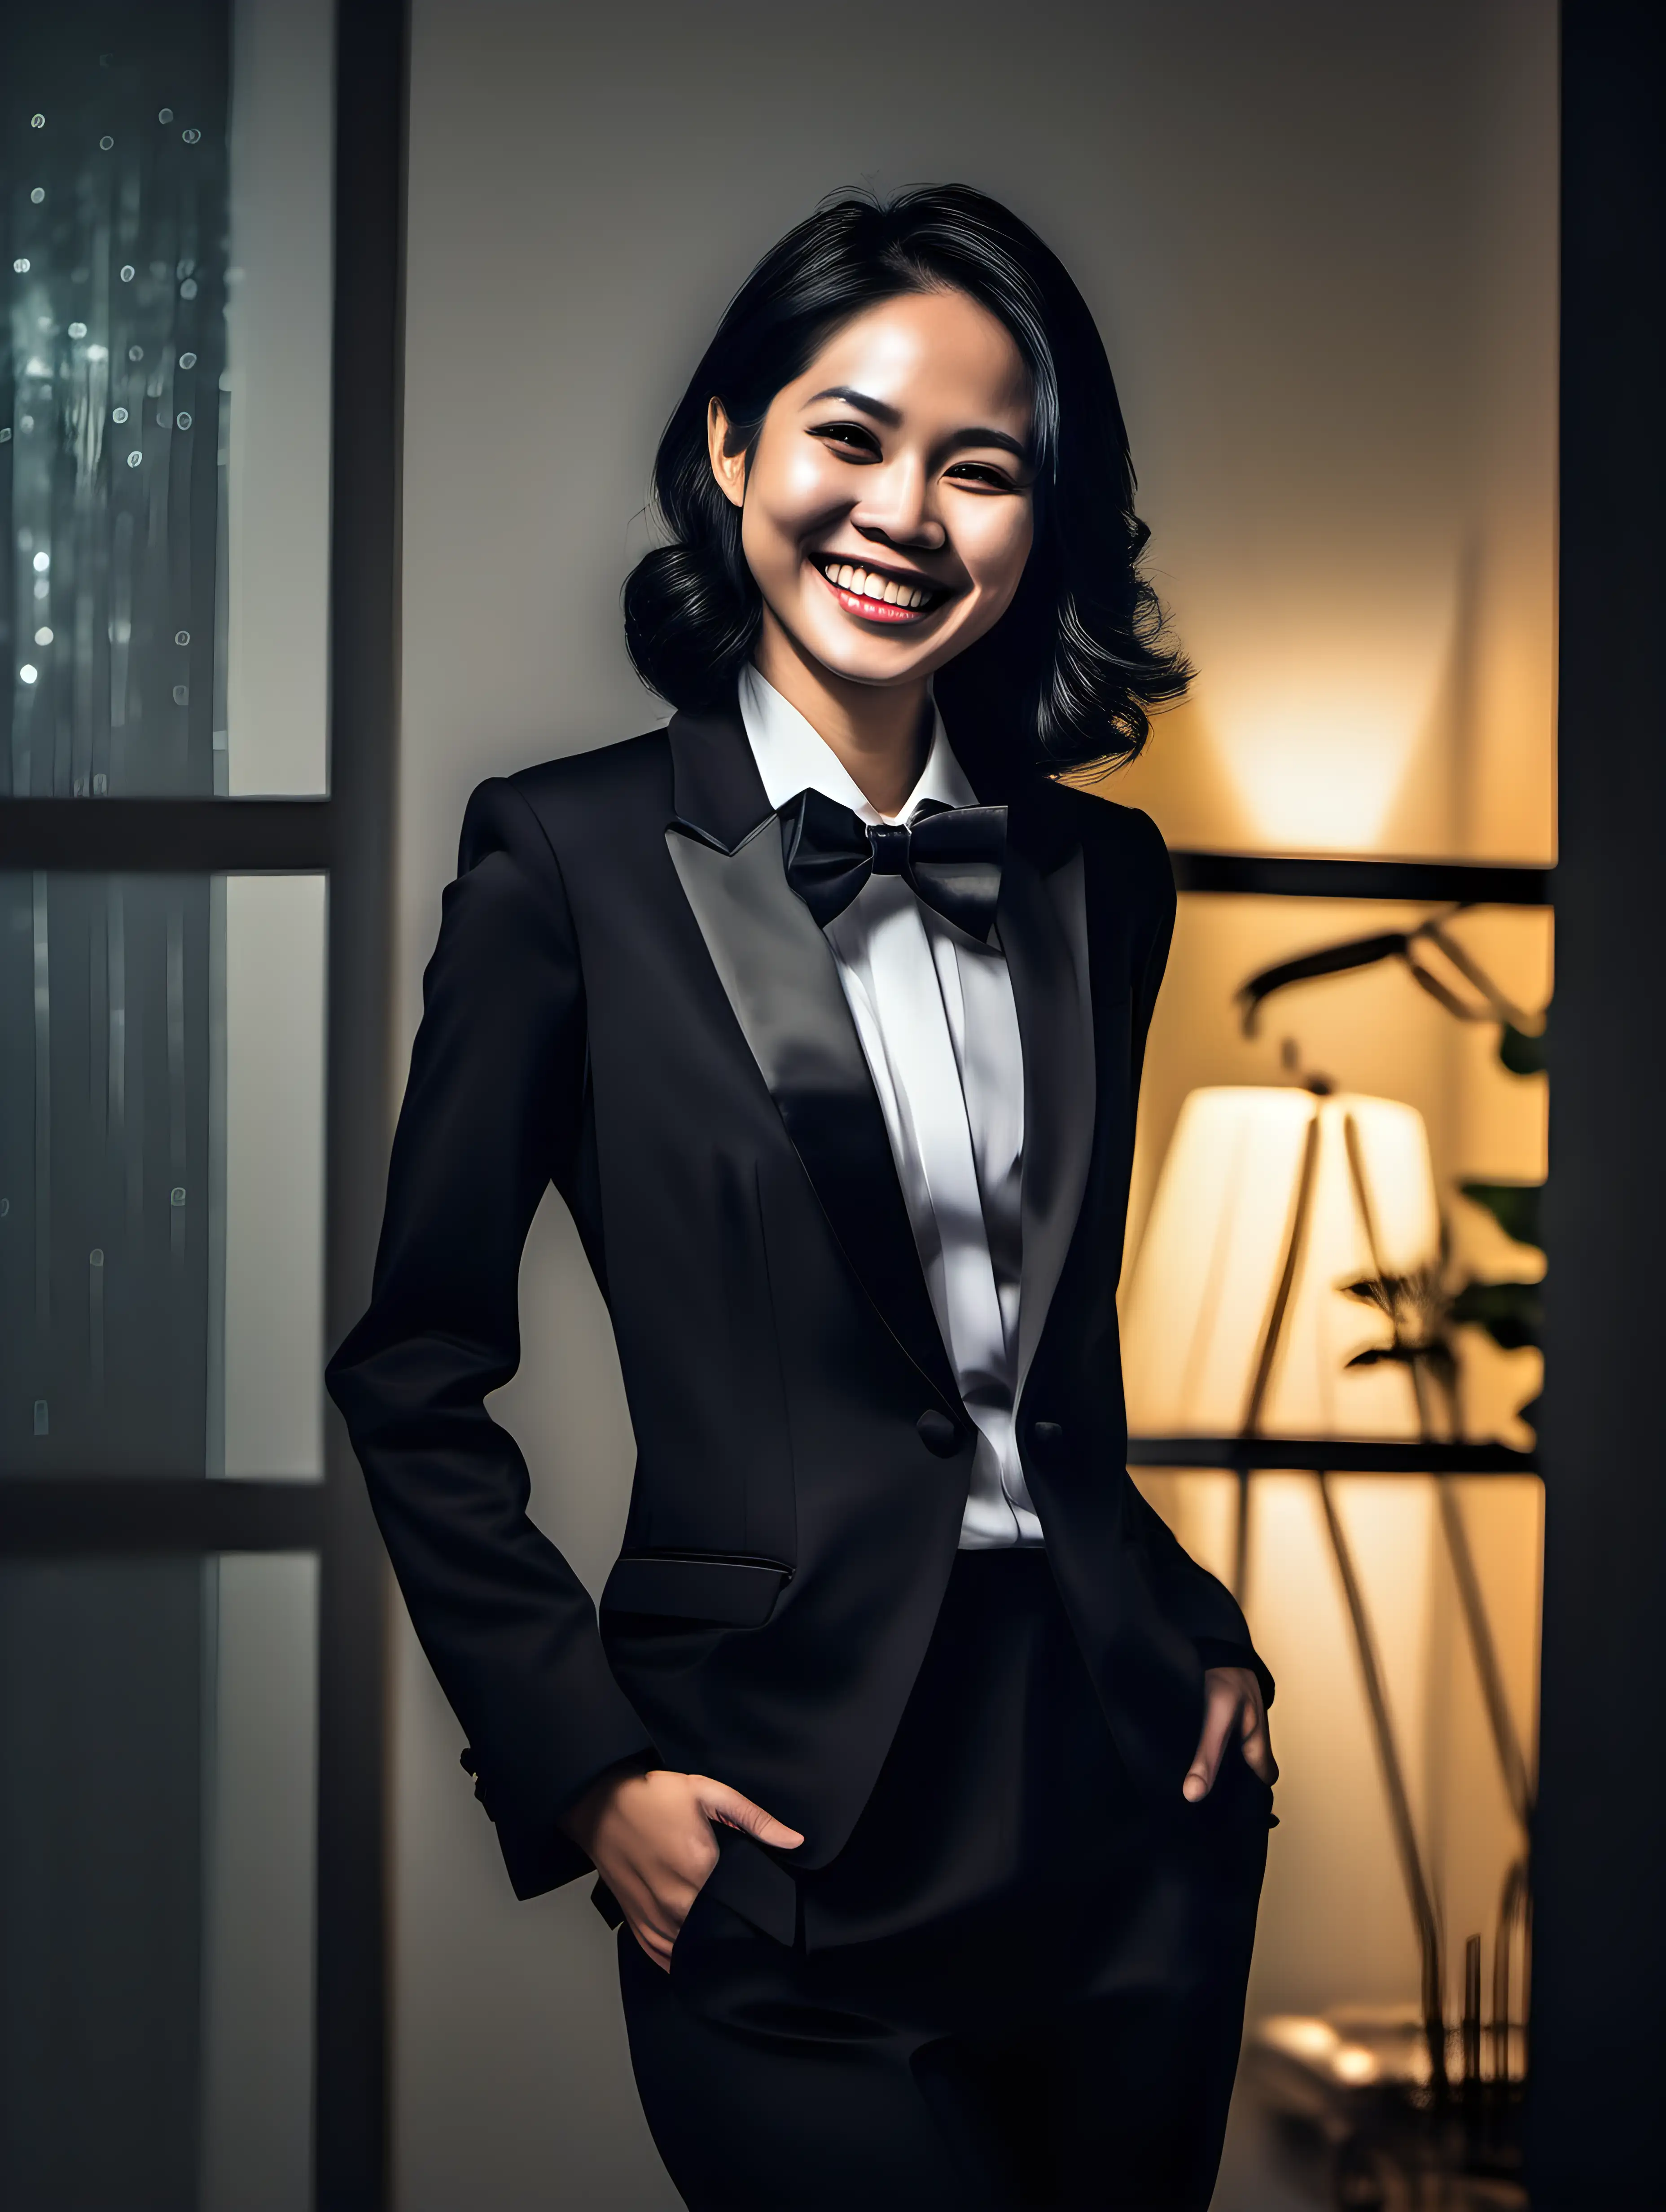 Confident and Smiling and laughing Vietnamese woman with shoulder length black hair wearing a tuxedo with a black bow tie is standing in a room at night.  Her jacket is open.  She has cufflinks.